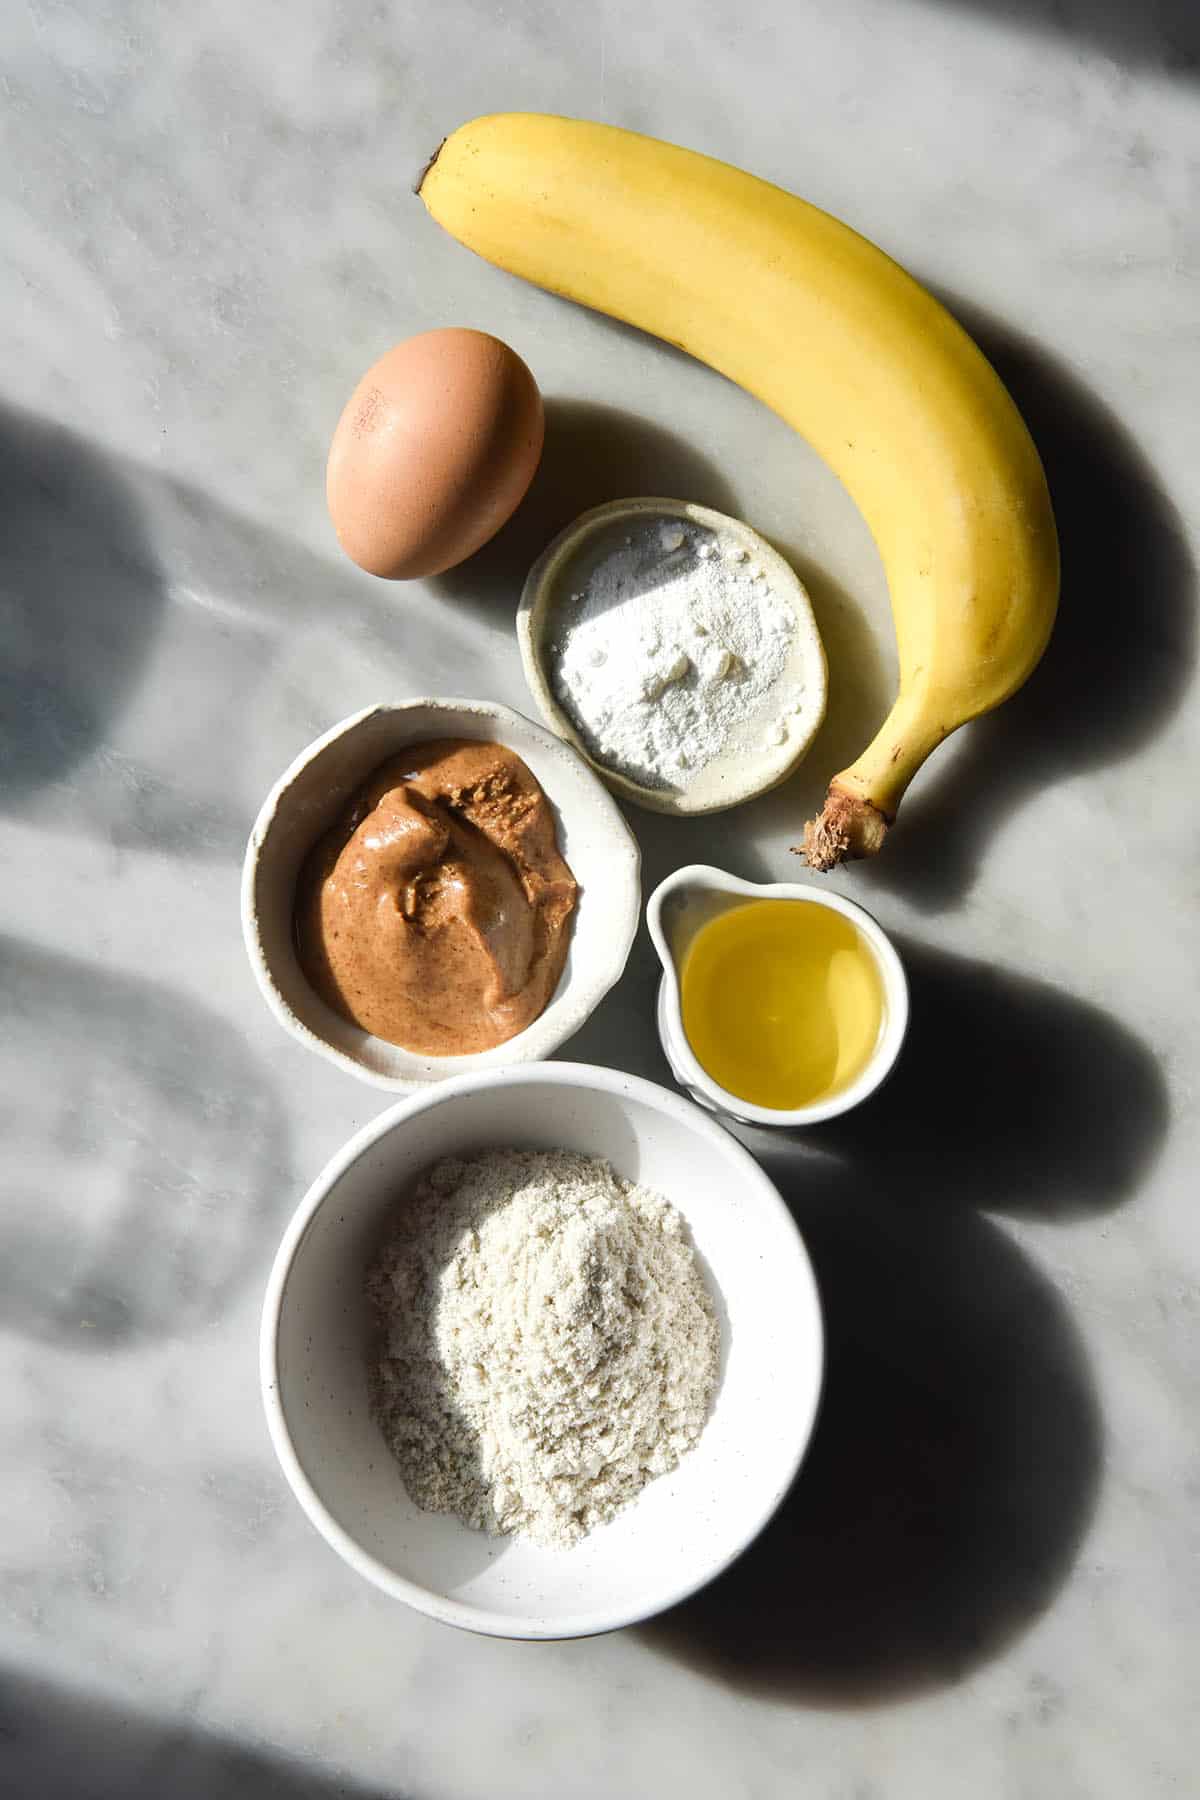 An aerial view of the ingredients for protein powder pancakes in small ceramic pinch bowls on a white marble table in harsh sunlight. Water glasses sit to the left of the image and cast shadow patterns across the image. 